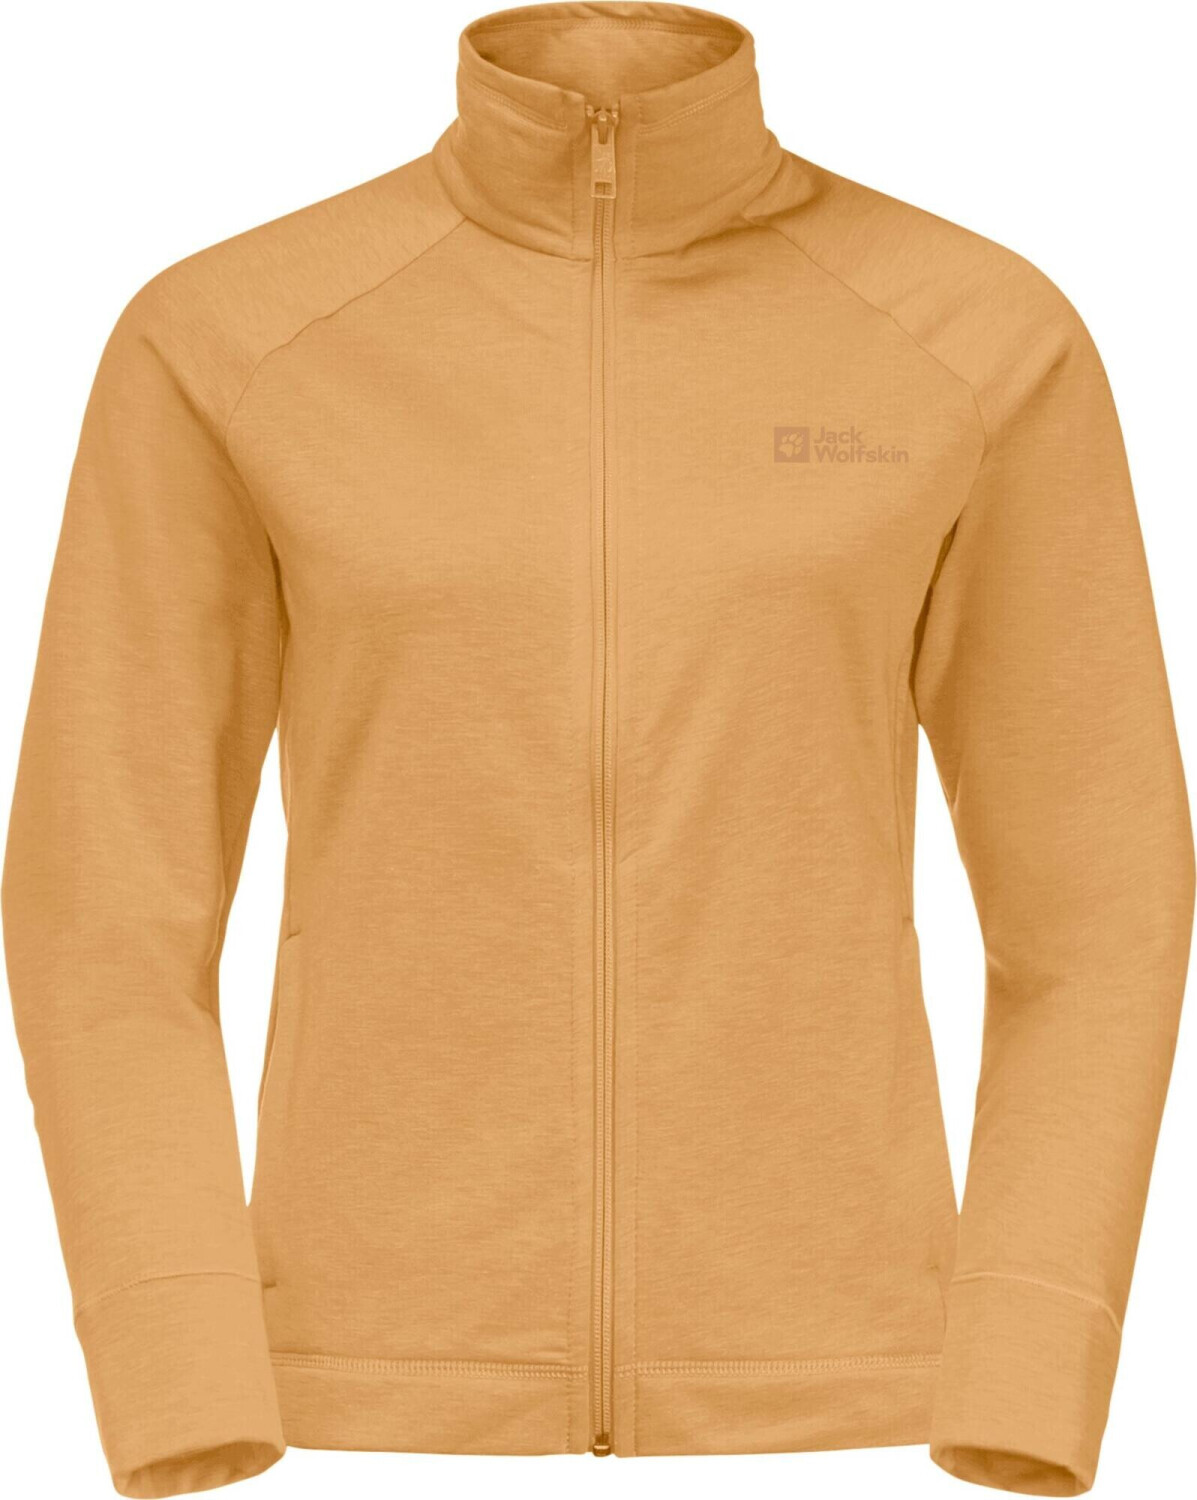 Buy Jack Wolfskin Waldsee Jacket W honey yellow from £48.00 (Today ...